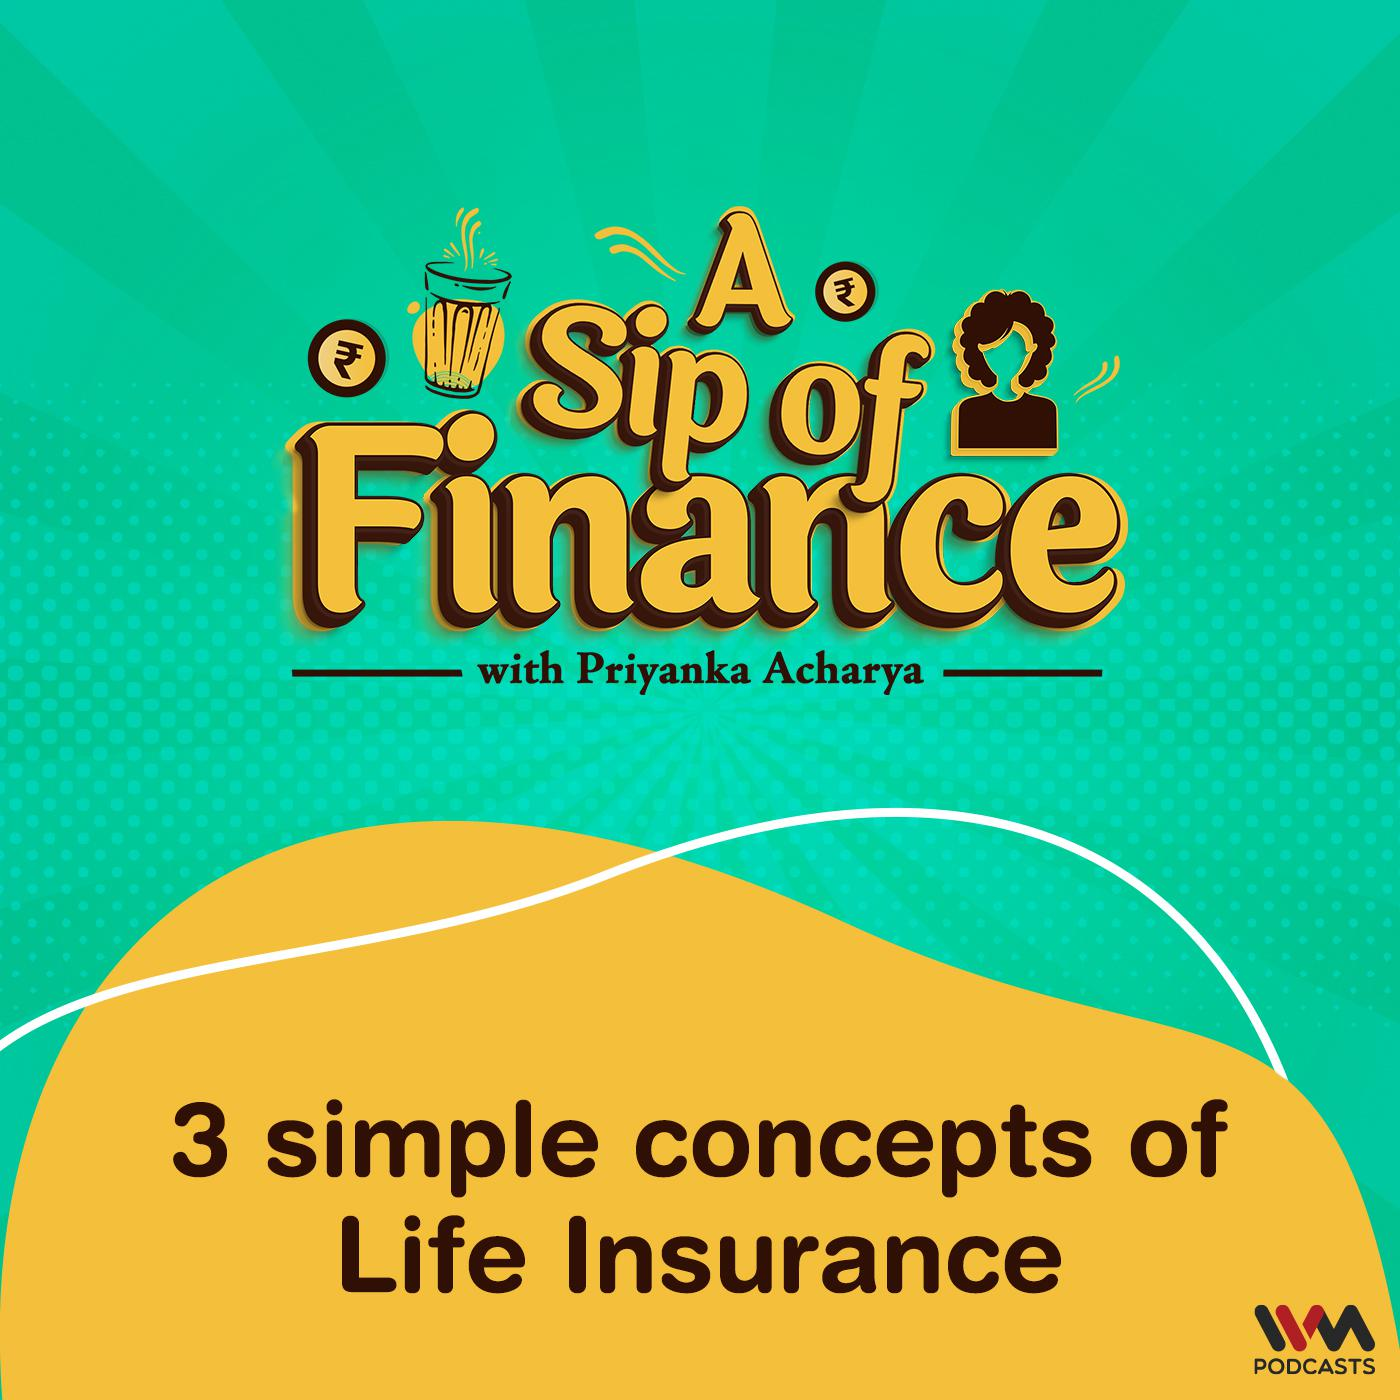 3 simple concepts of Life Insurance